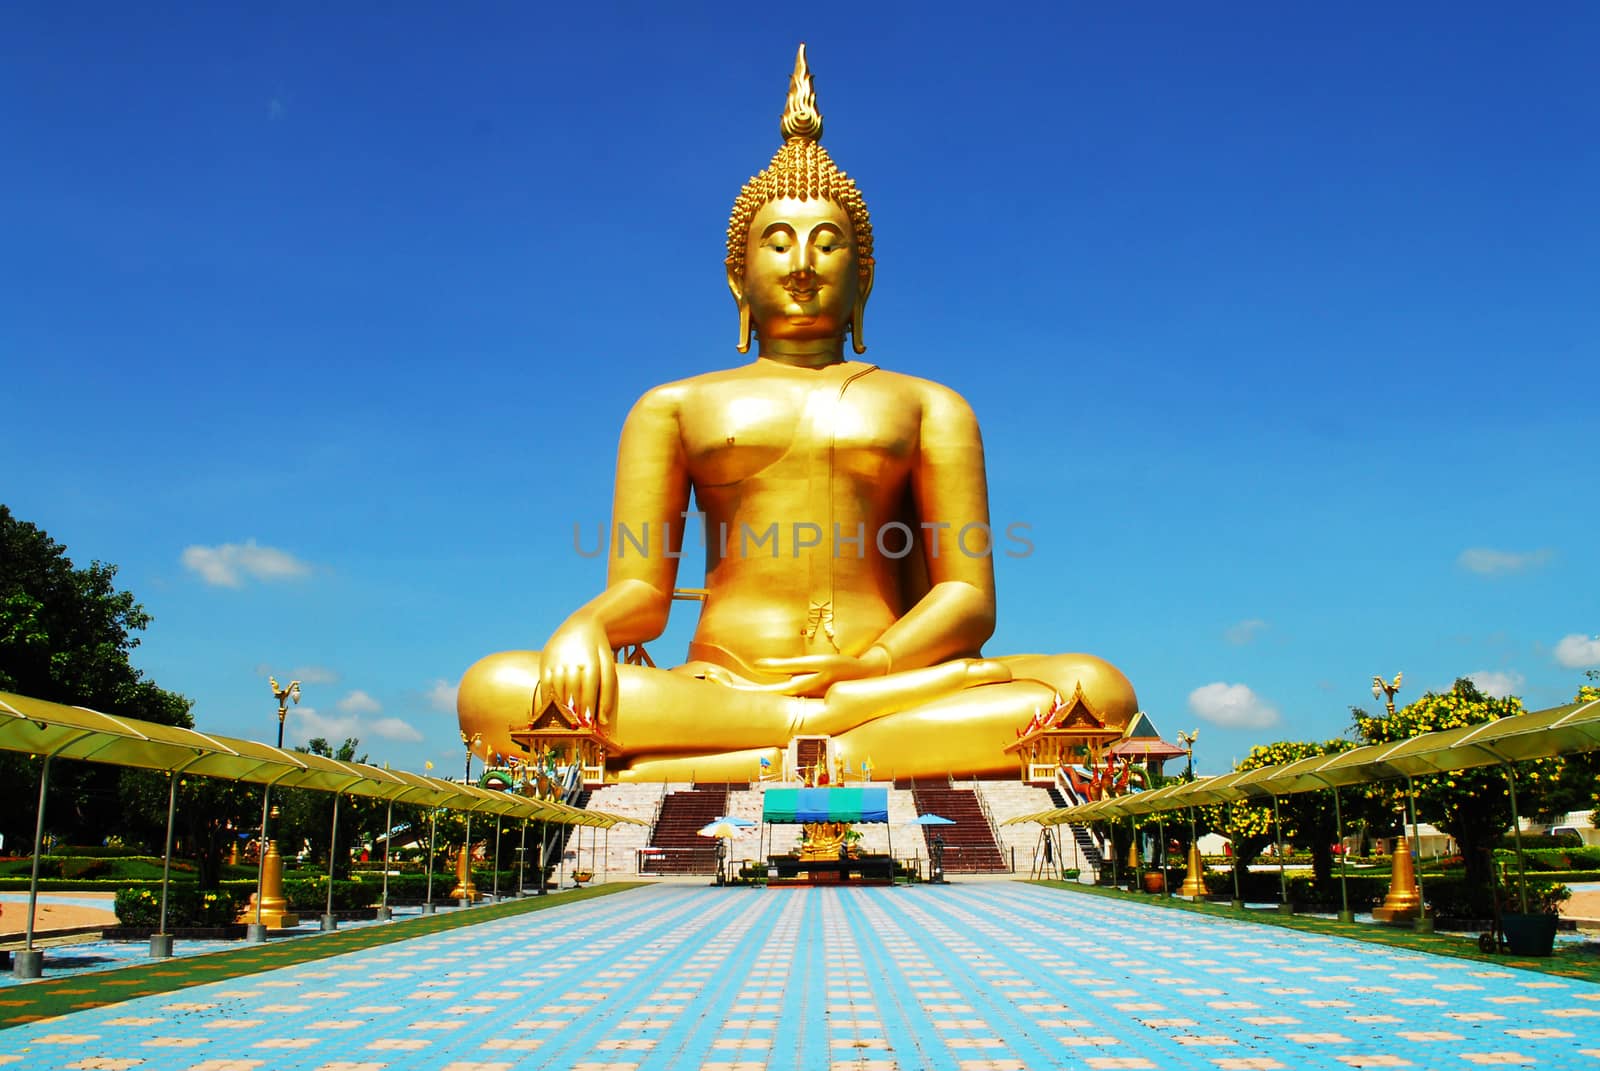 A Golden Buddha Image by prowpat